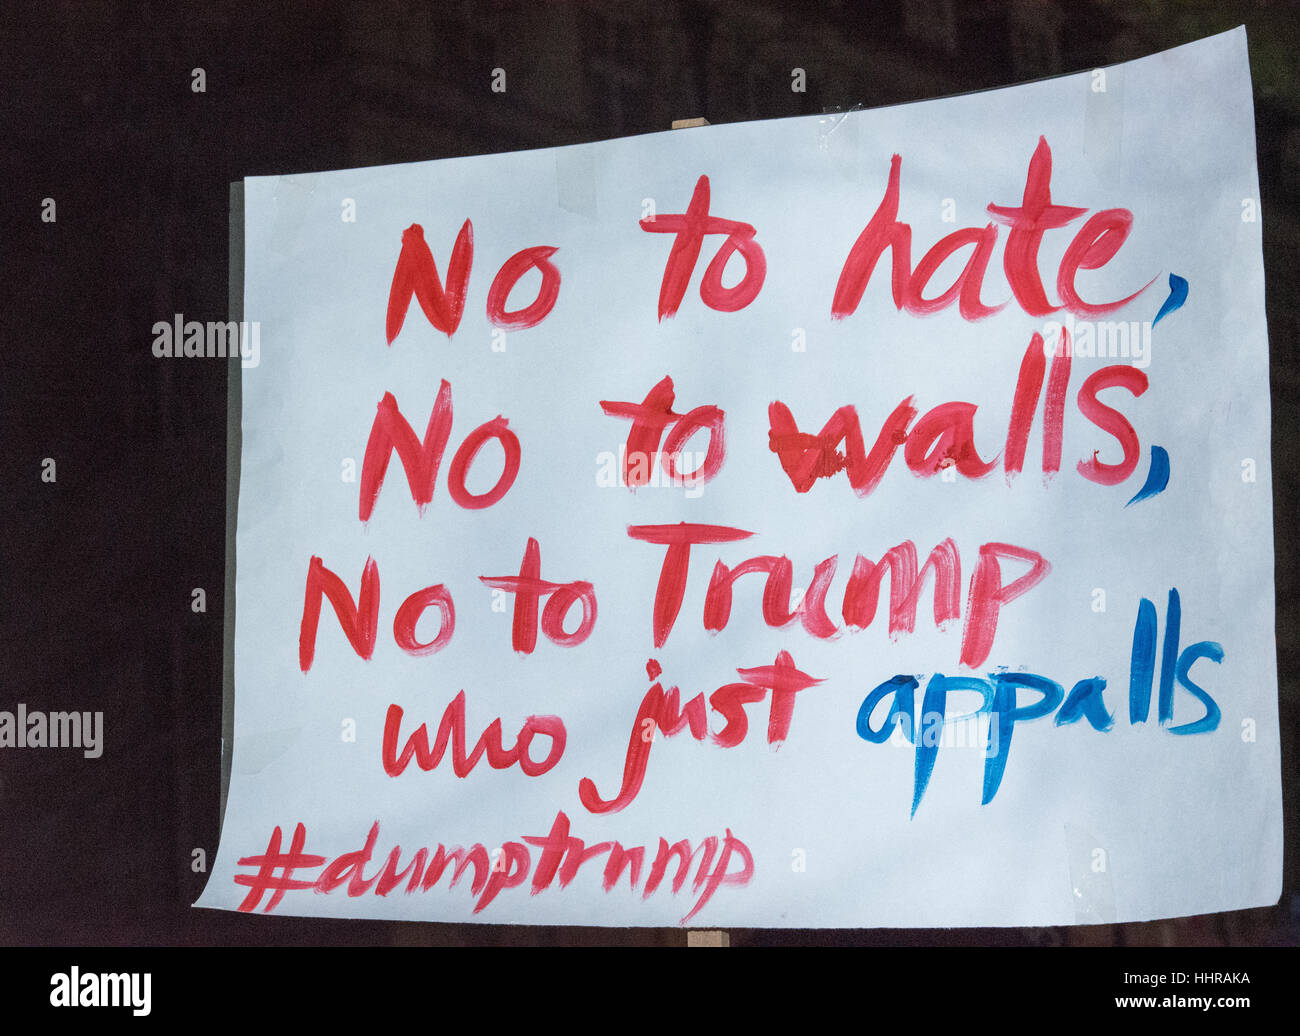 London, UK. 20th January, 2017. Banners and signage at the anti-Trump rally and march outside the US Embassy in London. Credit: Ian Davidson/Alamy Live News Stock Photo